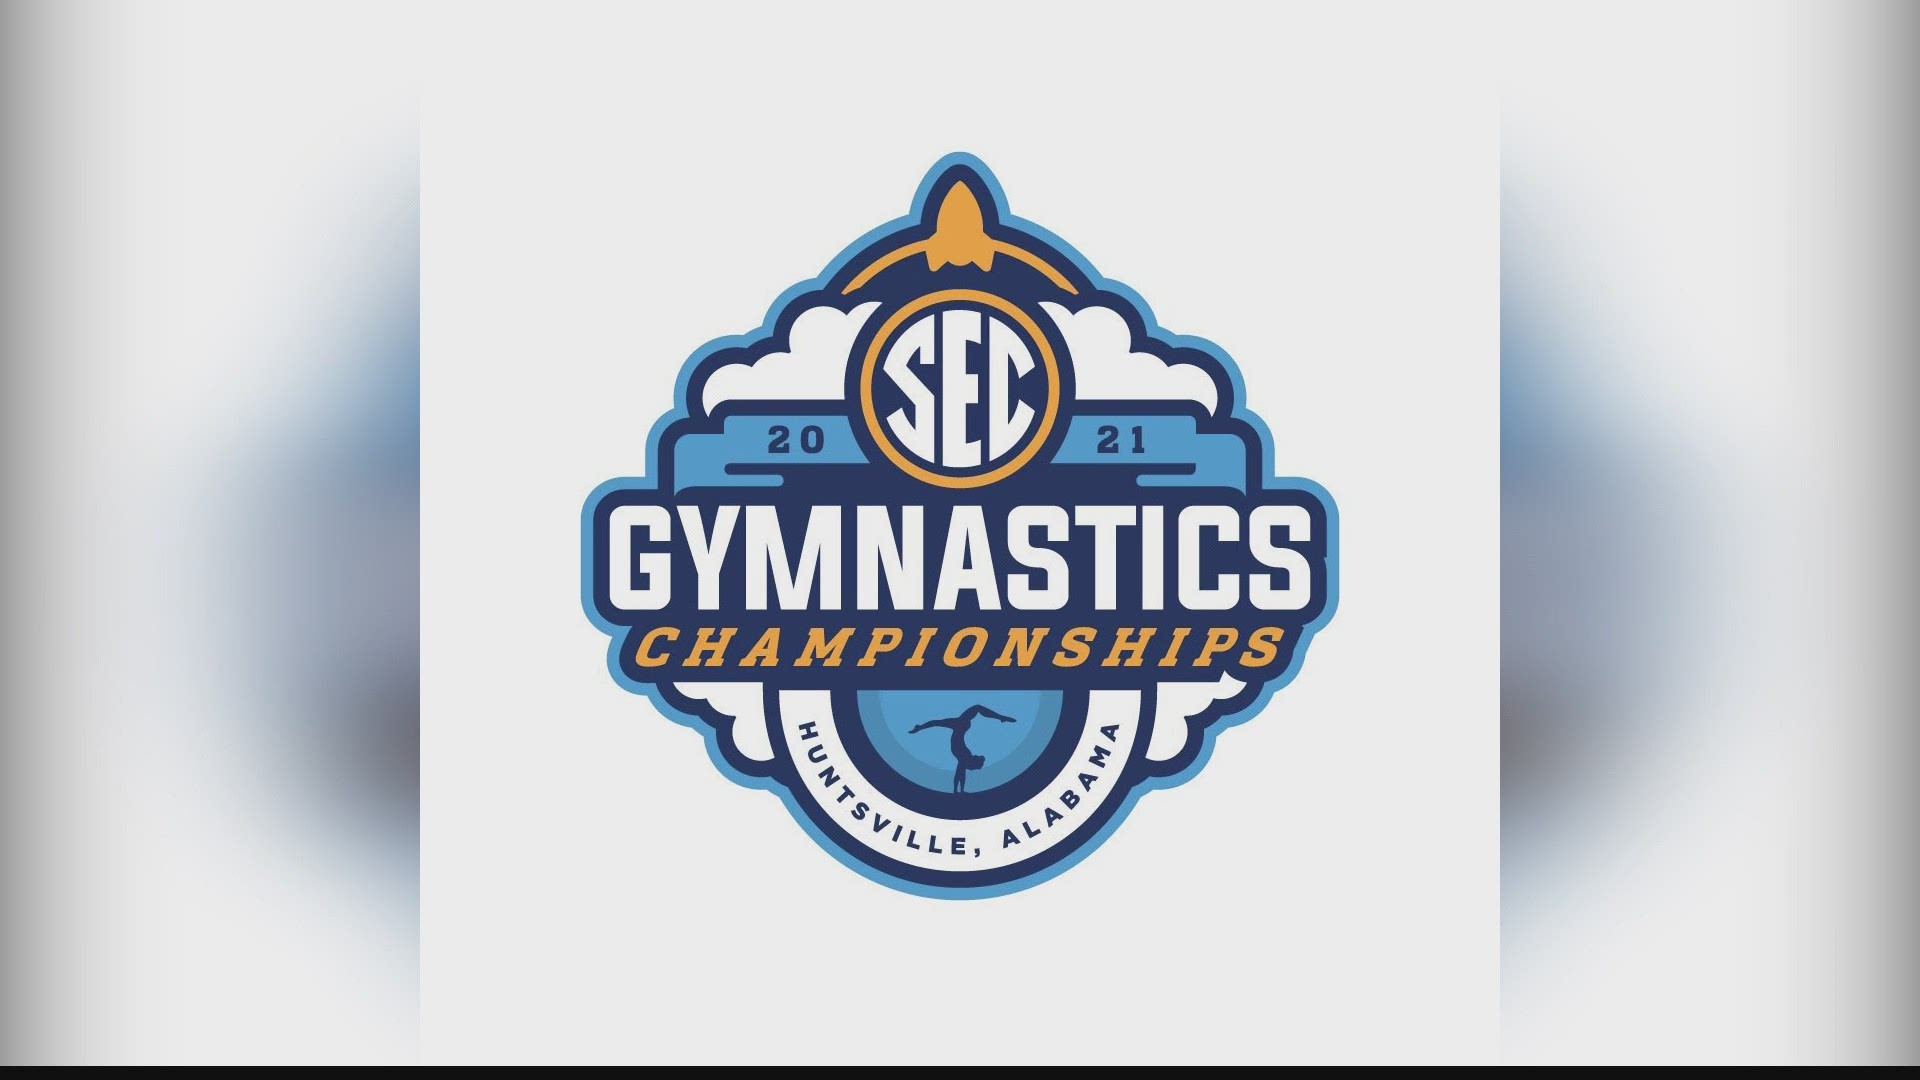 The Southeastern Conference announced Tuesday it is adjusting the site of the 2021 SEC Gymnastics Championship from New Orleans to Huntsville due to Covid-19